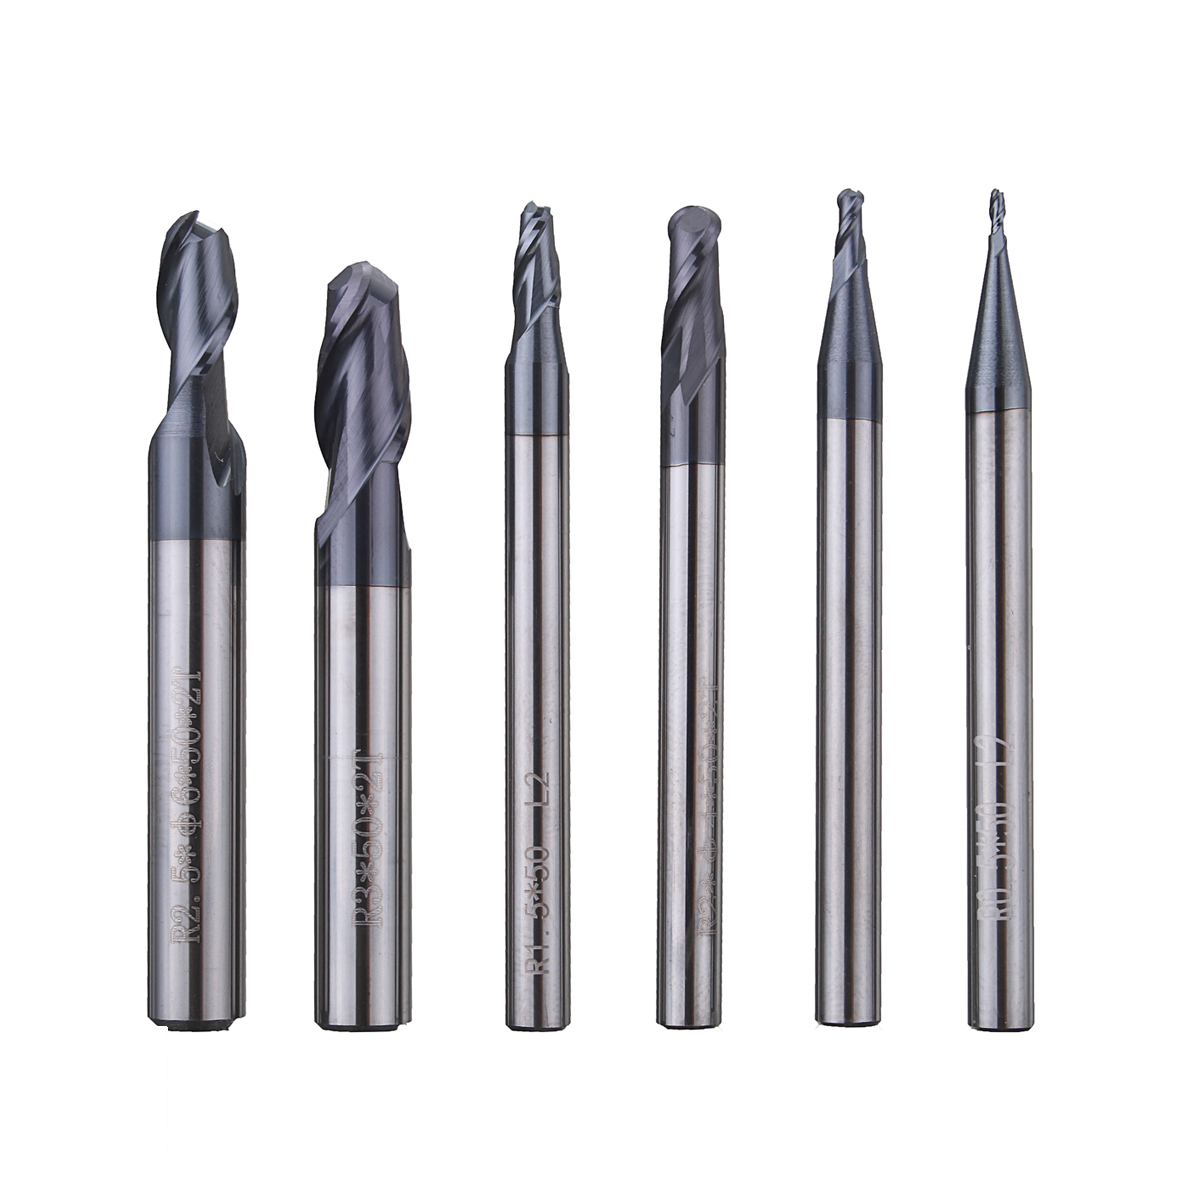 Drillpro 6pcs Carbide 2 Flute Ball Nose End Mill Nitrogen Coated CNC Slot Drill R0.5 to 3mm